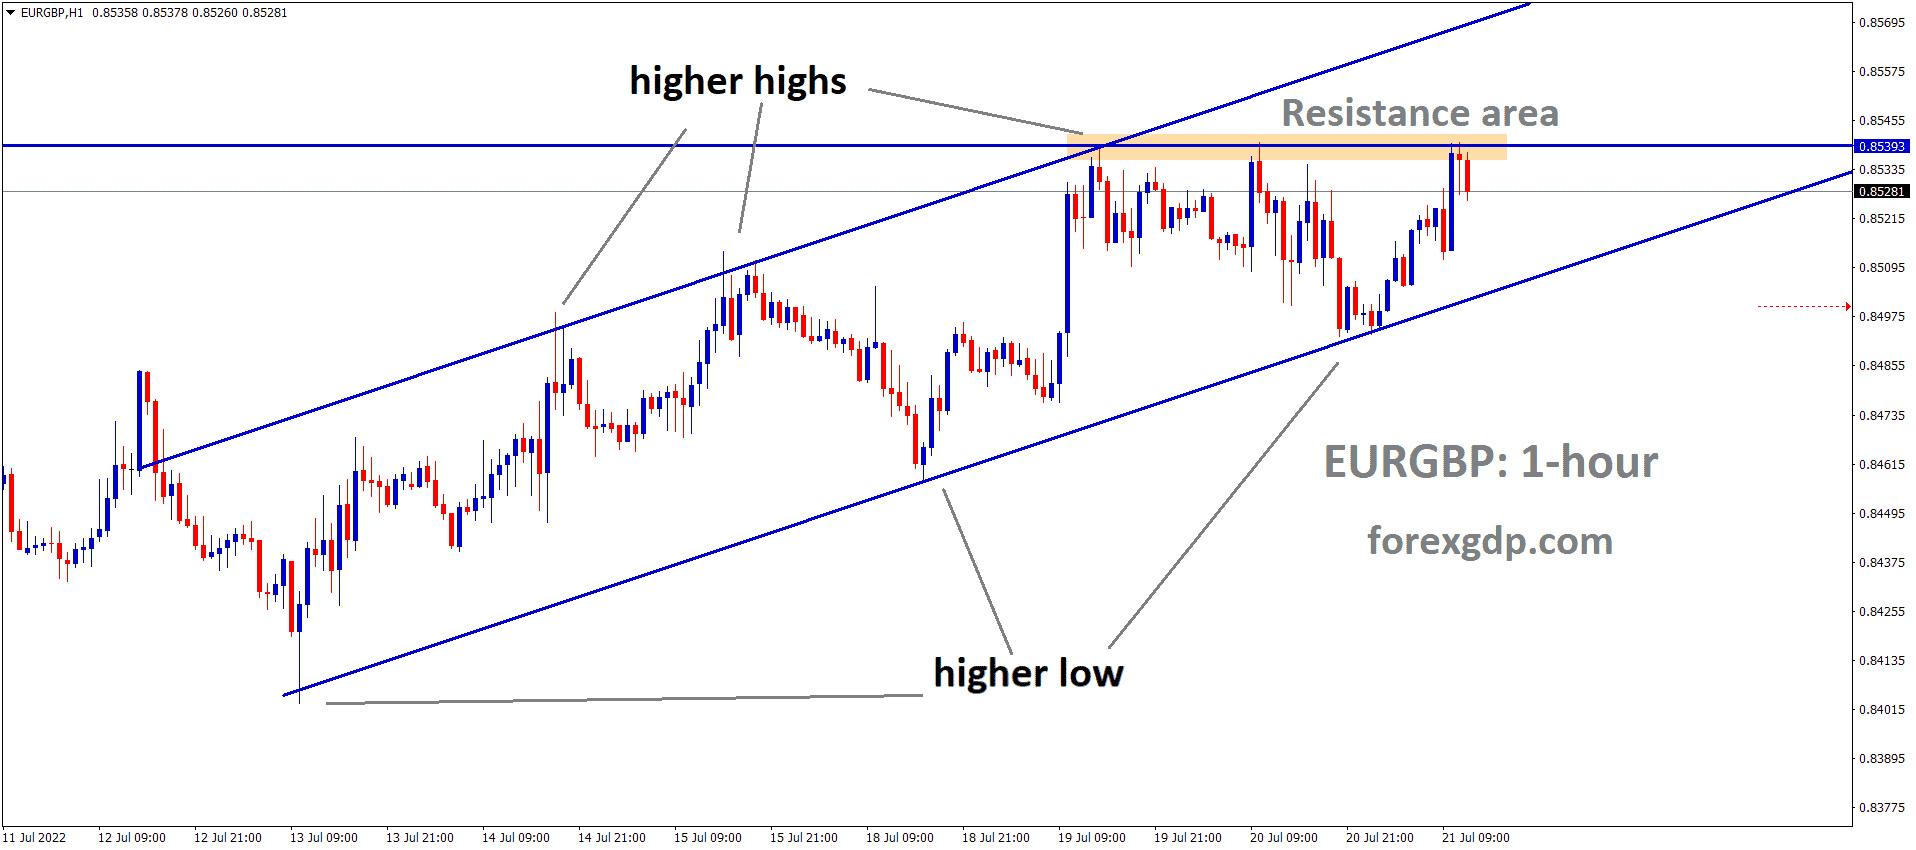 EURGBP is moving in an Ascending channel and the Market has reached the Horizontal resistance area of the pattern.